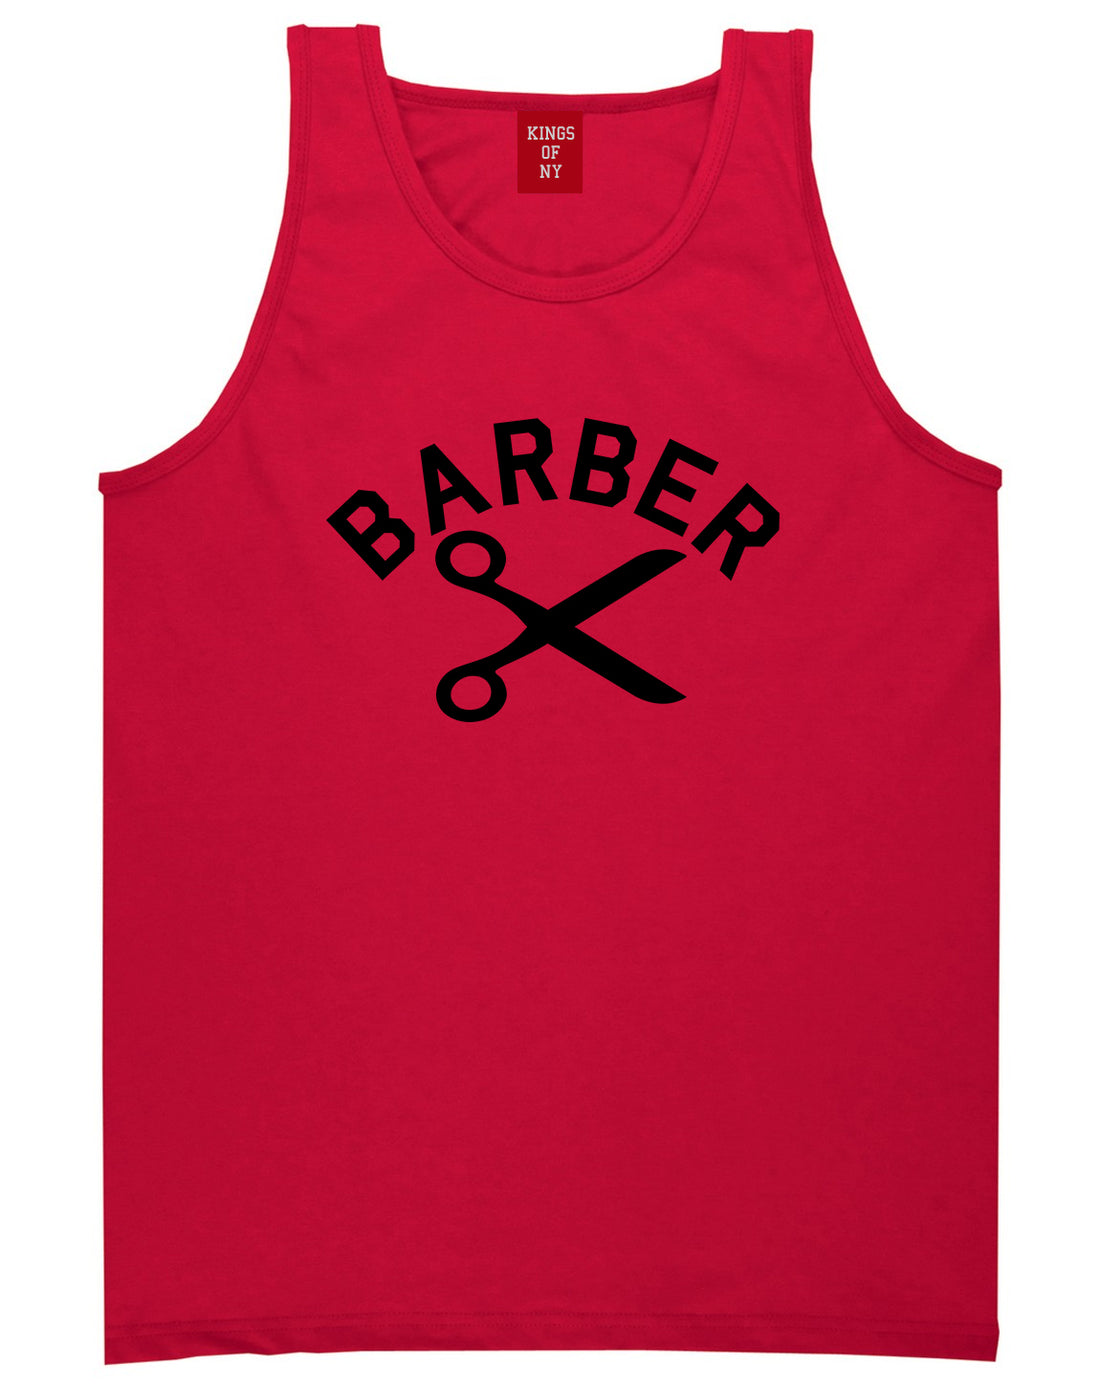 Barber Scissors Red Tank Top Shirt by Kings Of NY